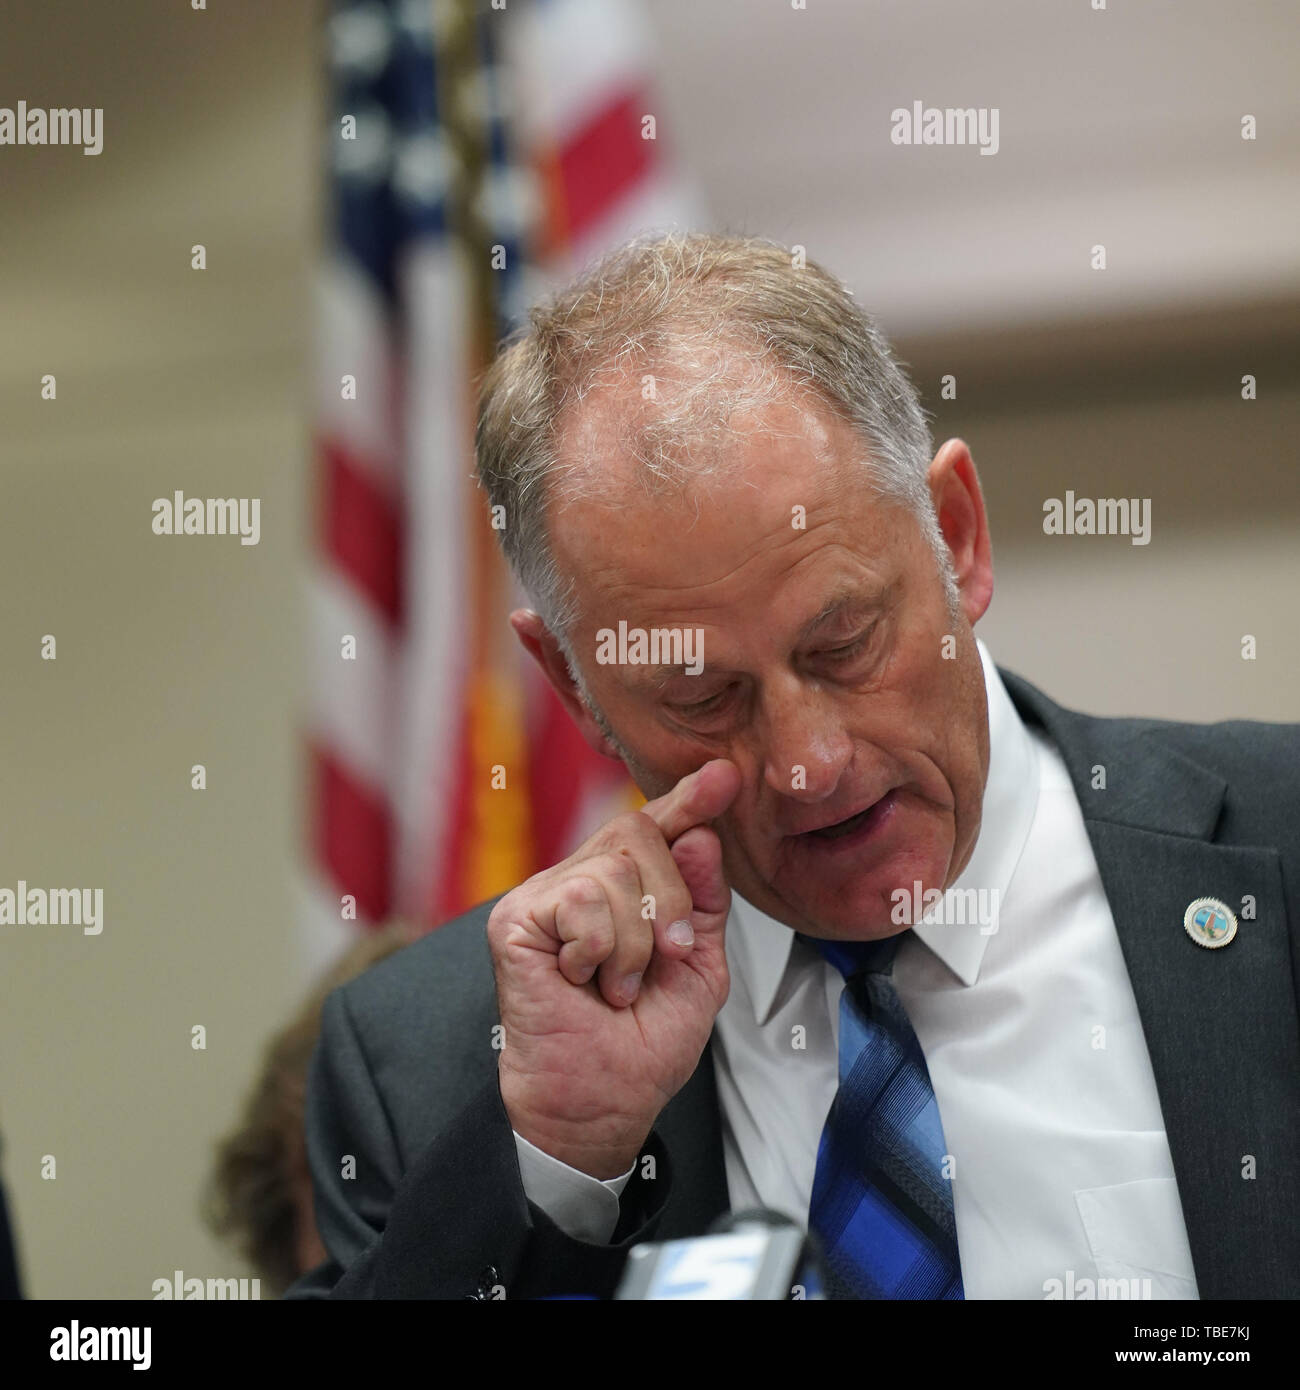 Virginia Beach, USA. 1st June, 2019. Virginia Beach City Manager Dave Hansen reacts during a press conference in Virginia Beach, Virginia, the United States, on June 1, 2019. The shooter who killed 12 people in a mass shooting in Virginia Beach, in the eastern U.S. state of Virginia, on Friday, has been identified as DeWayne Craddock, a 15-year city employee, local police said on Saturday. Credit: Liu Jie/Xinhua/Alamy Live News Stock Photo